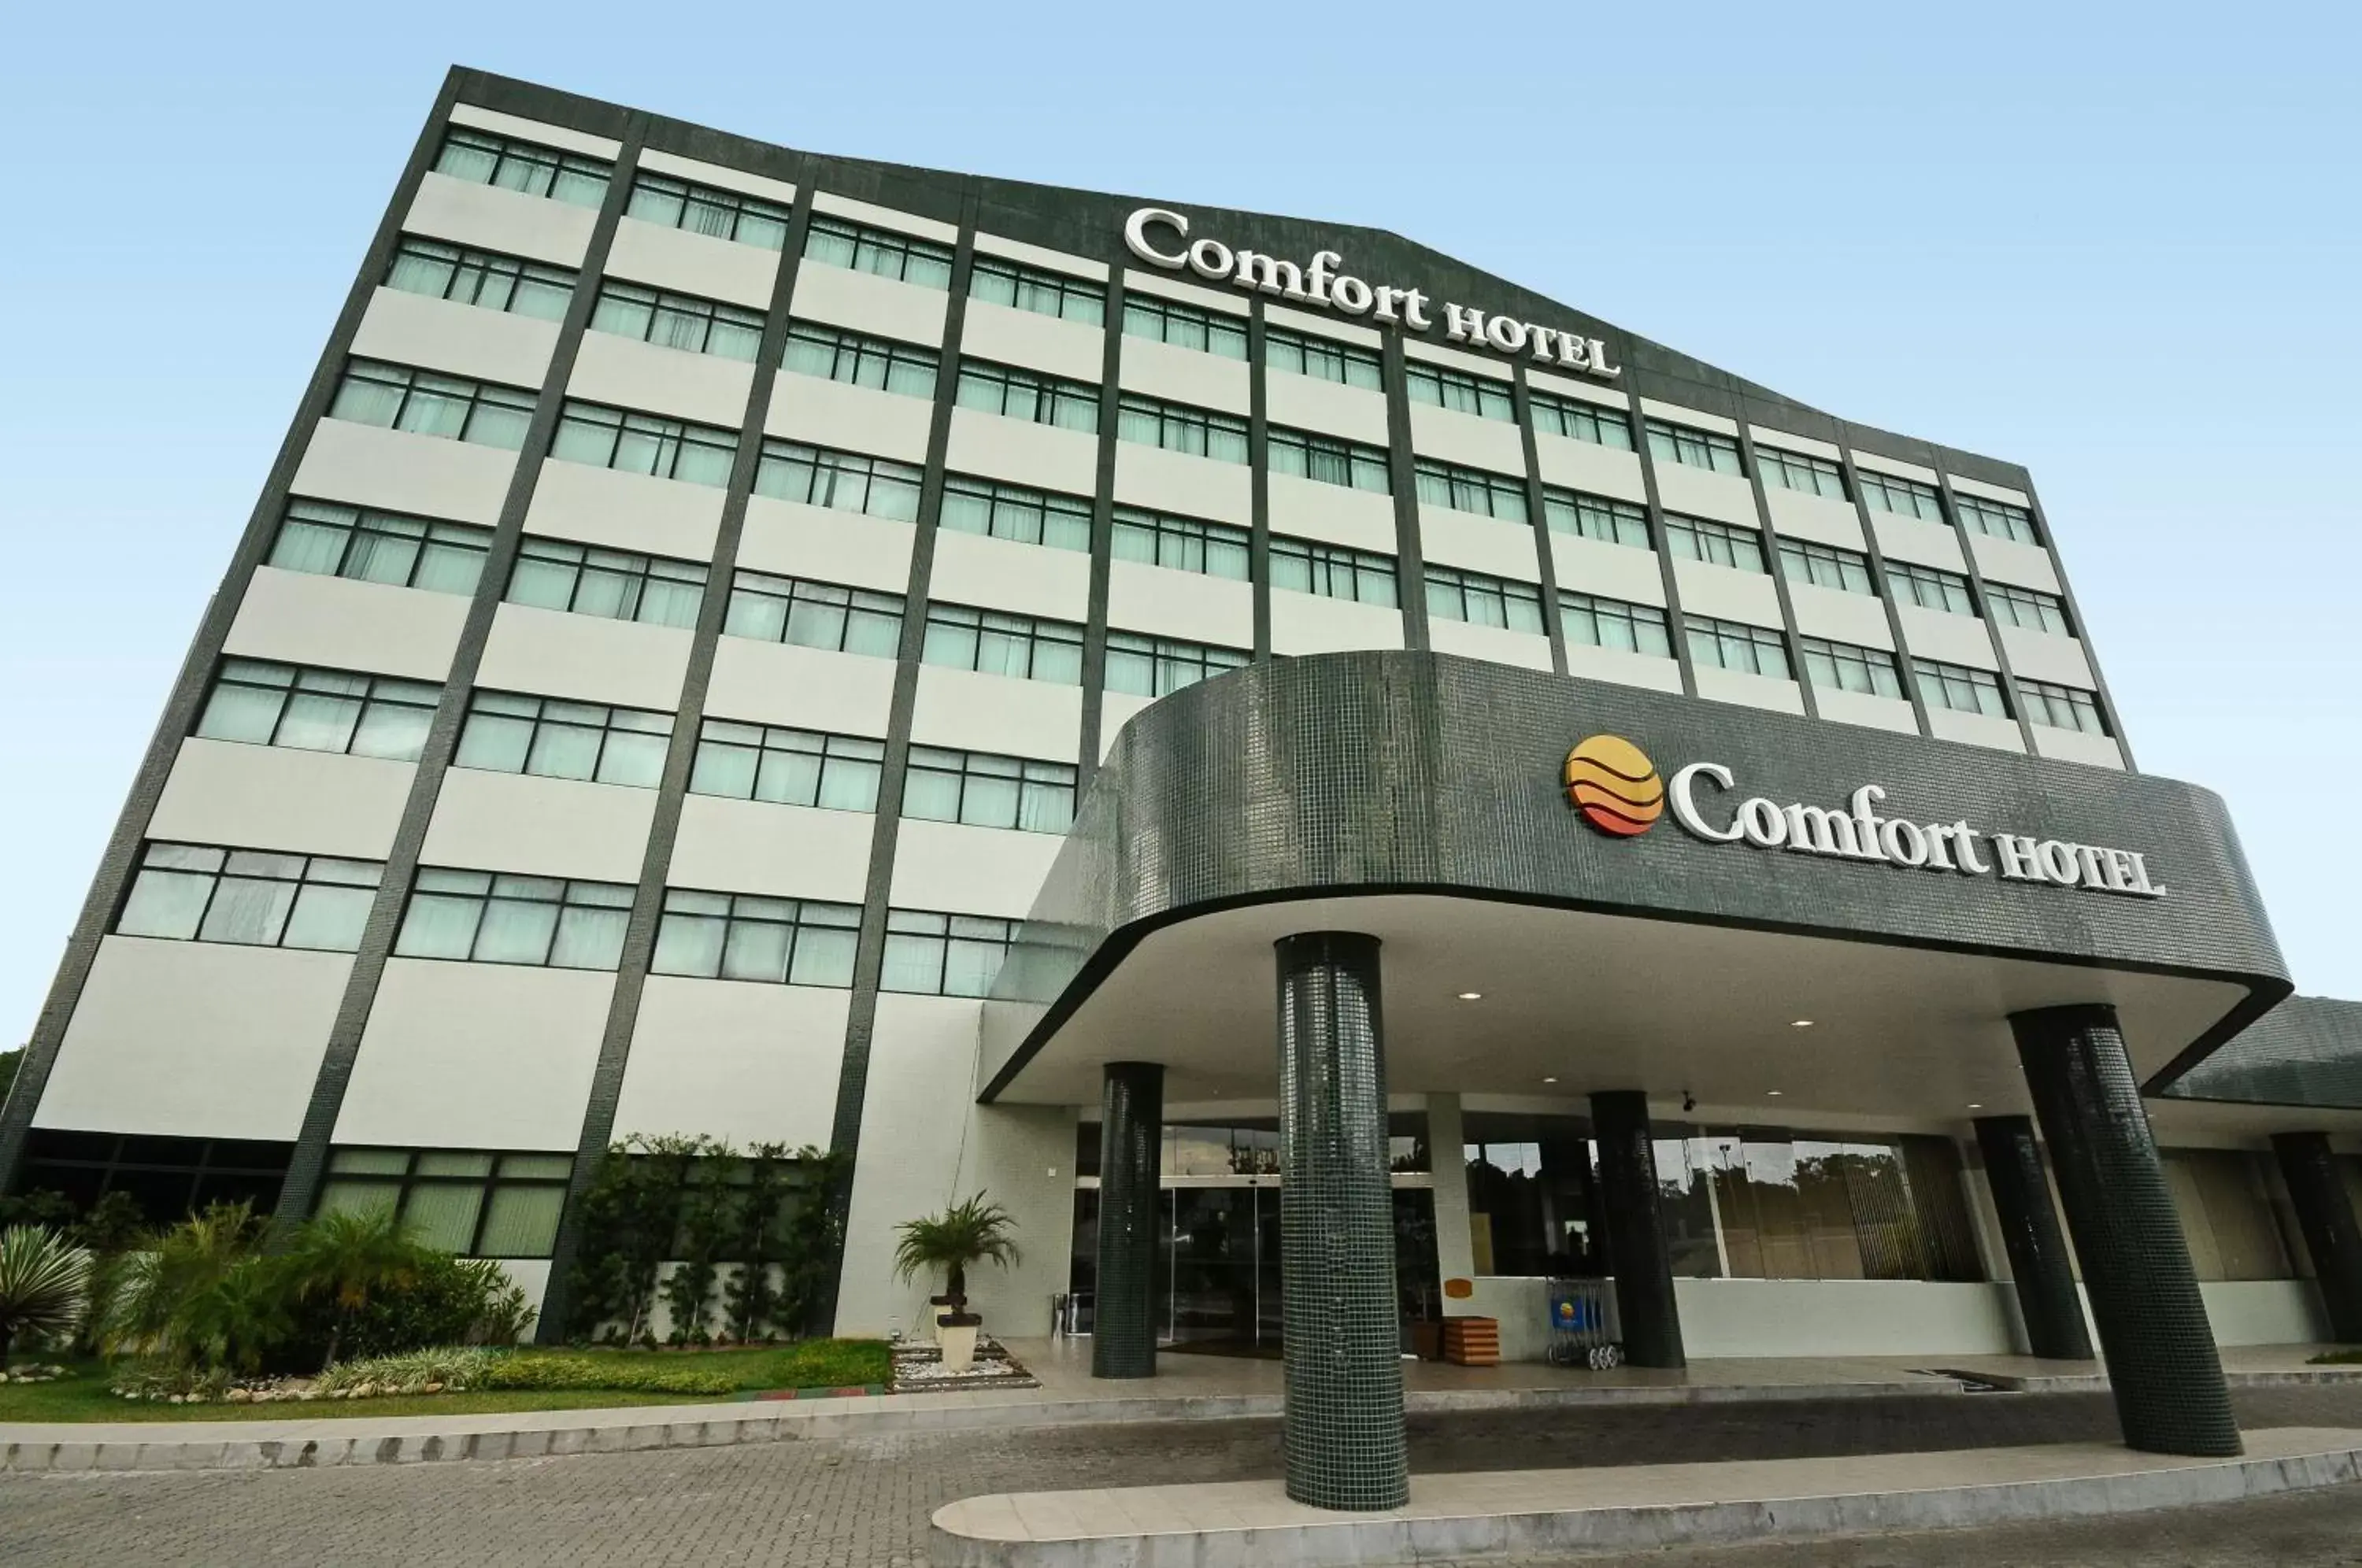 Property Building in Comfort Hotel Manaus